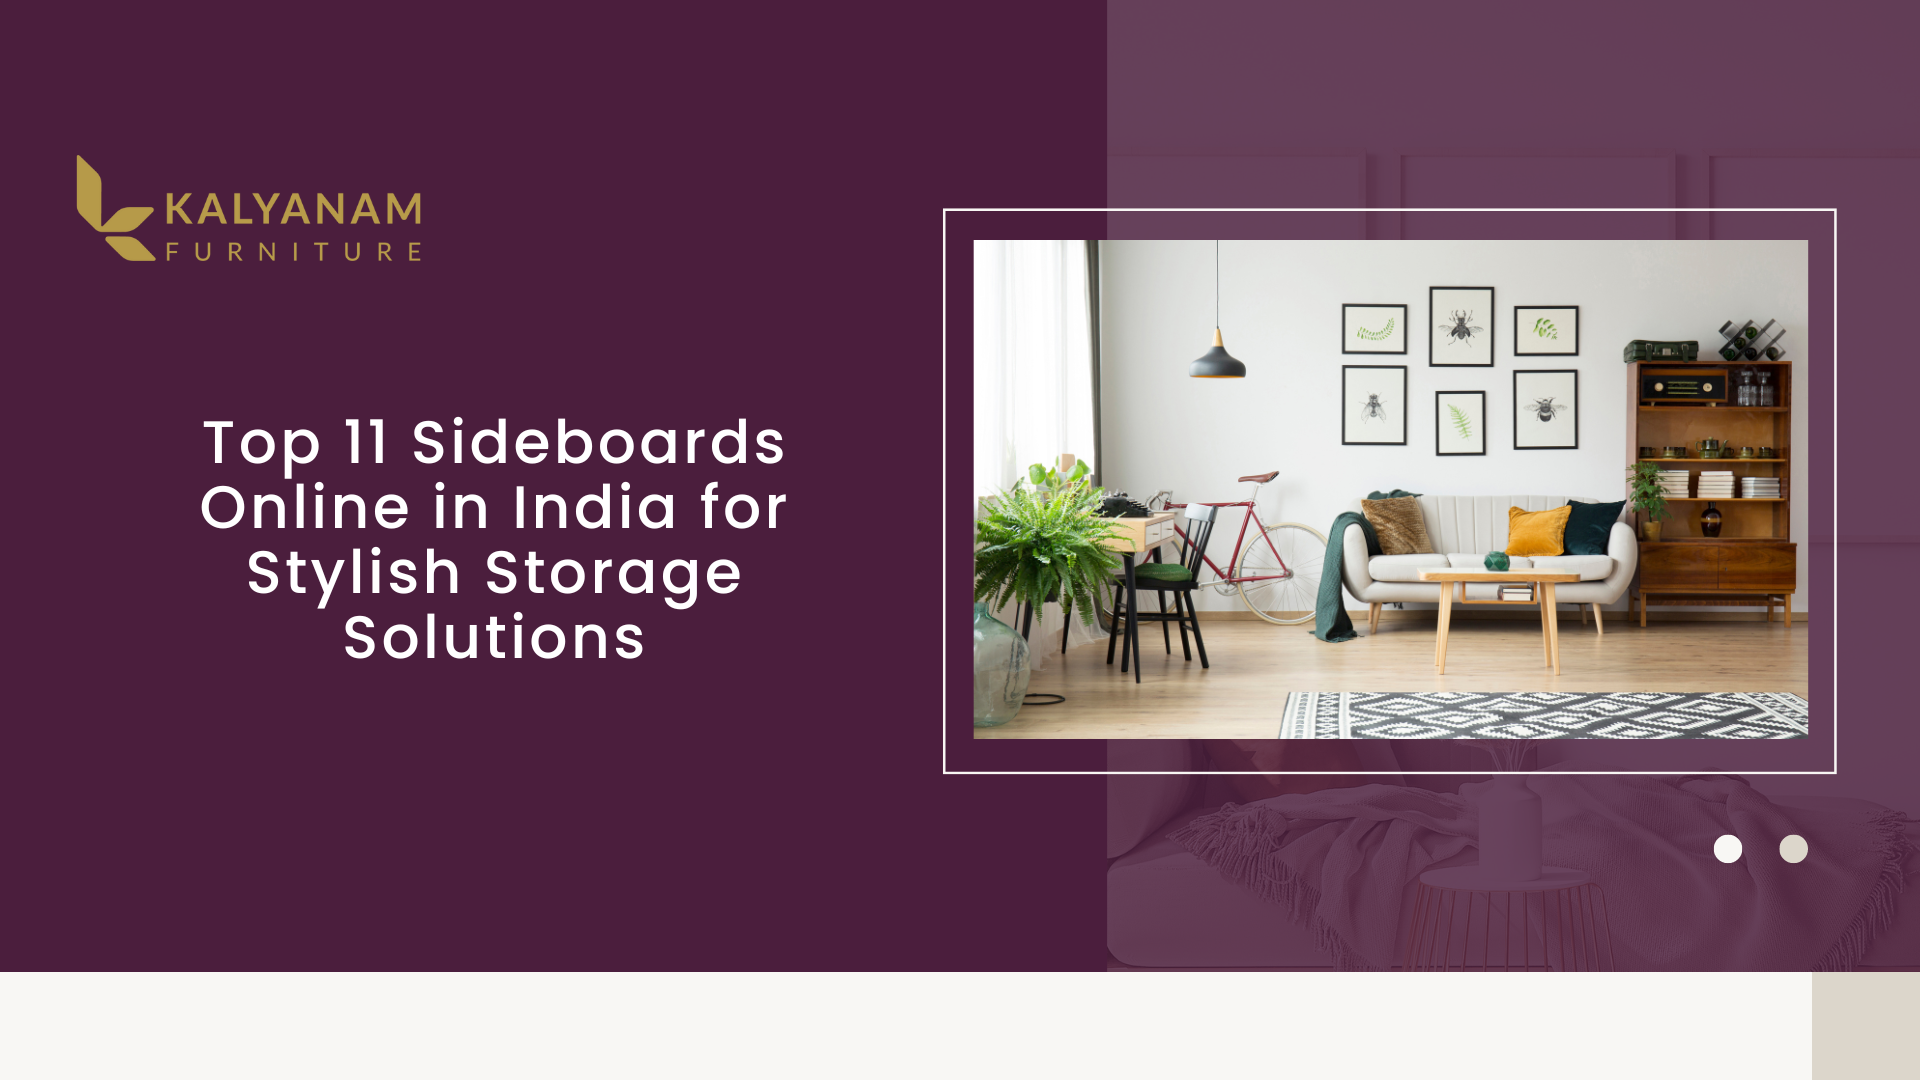 Top 11 Sideboards Online in India for Stylish Storage Solutions